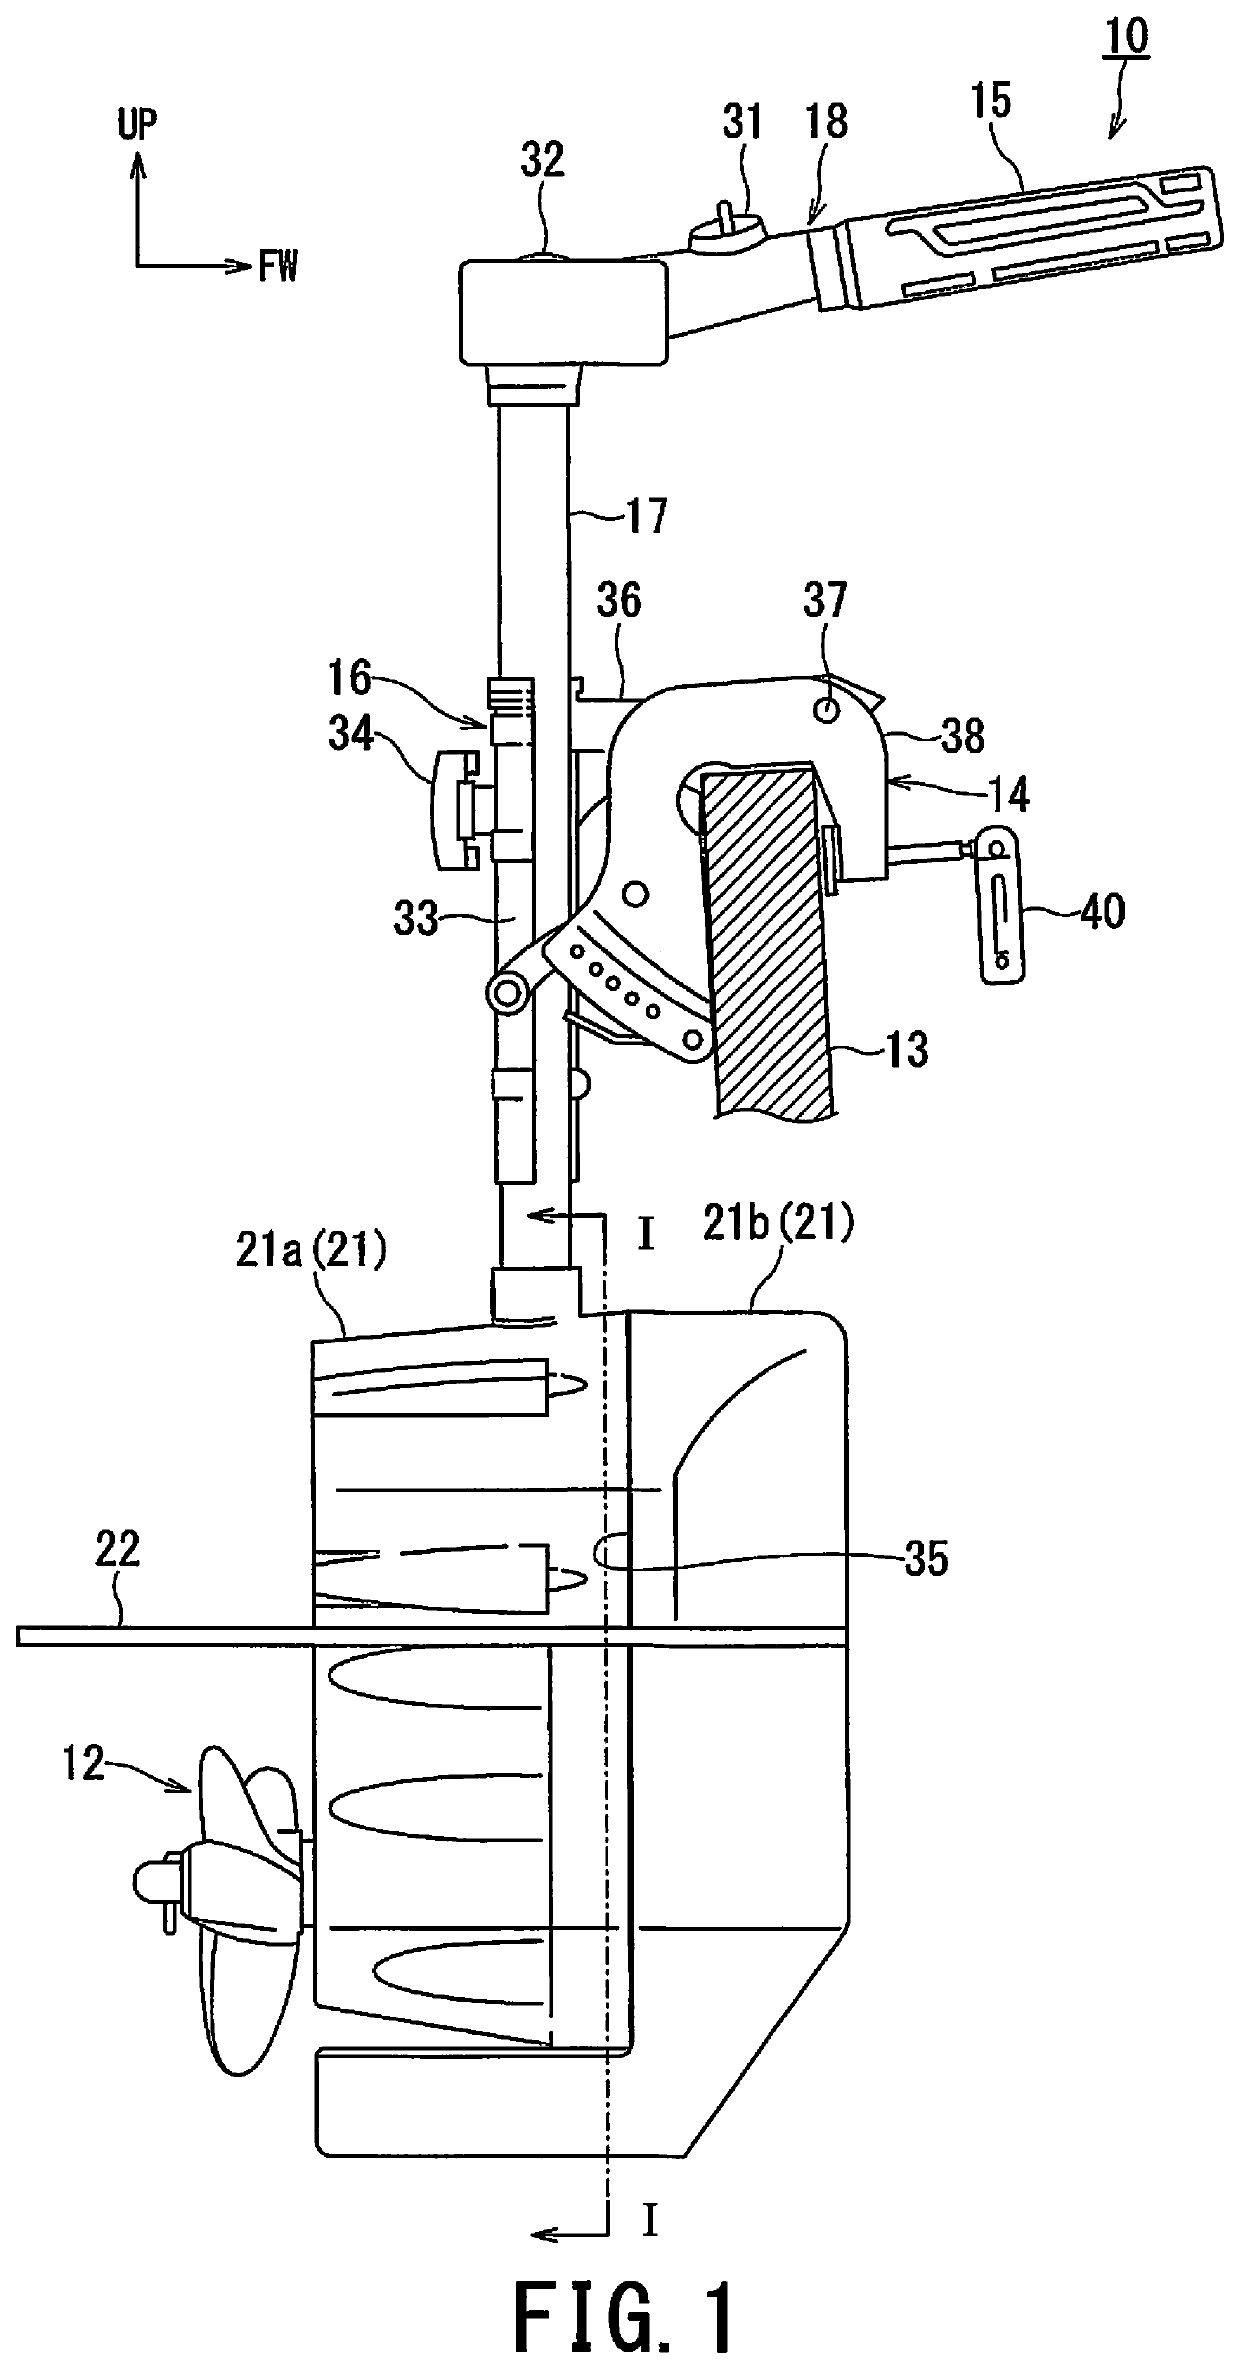 Electric outboard motor